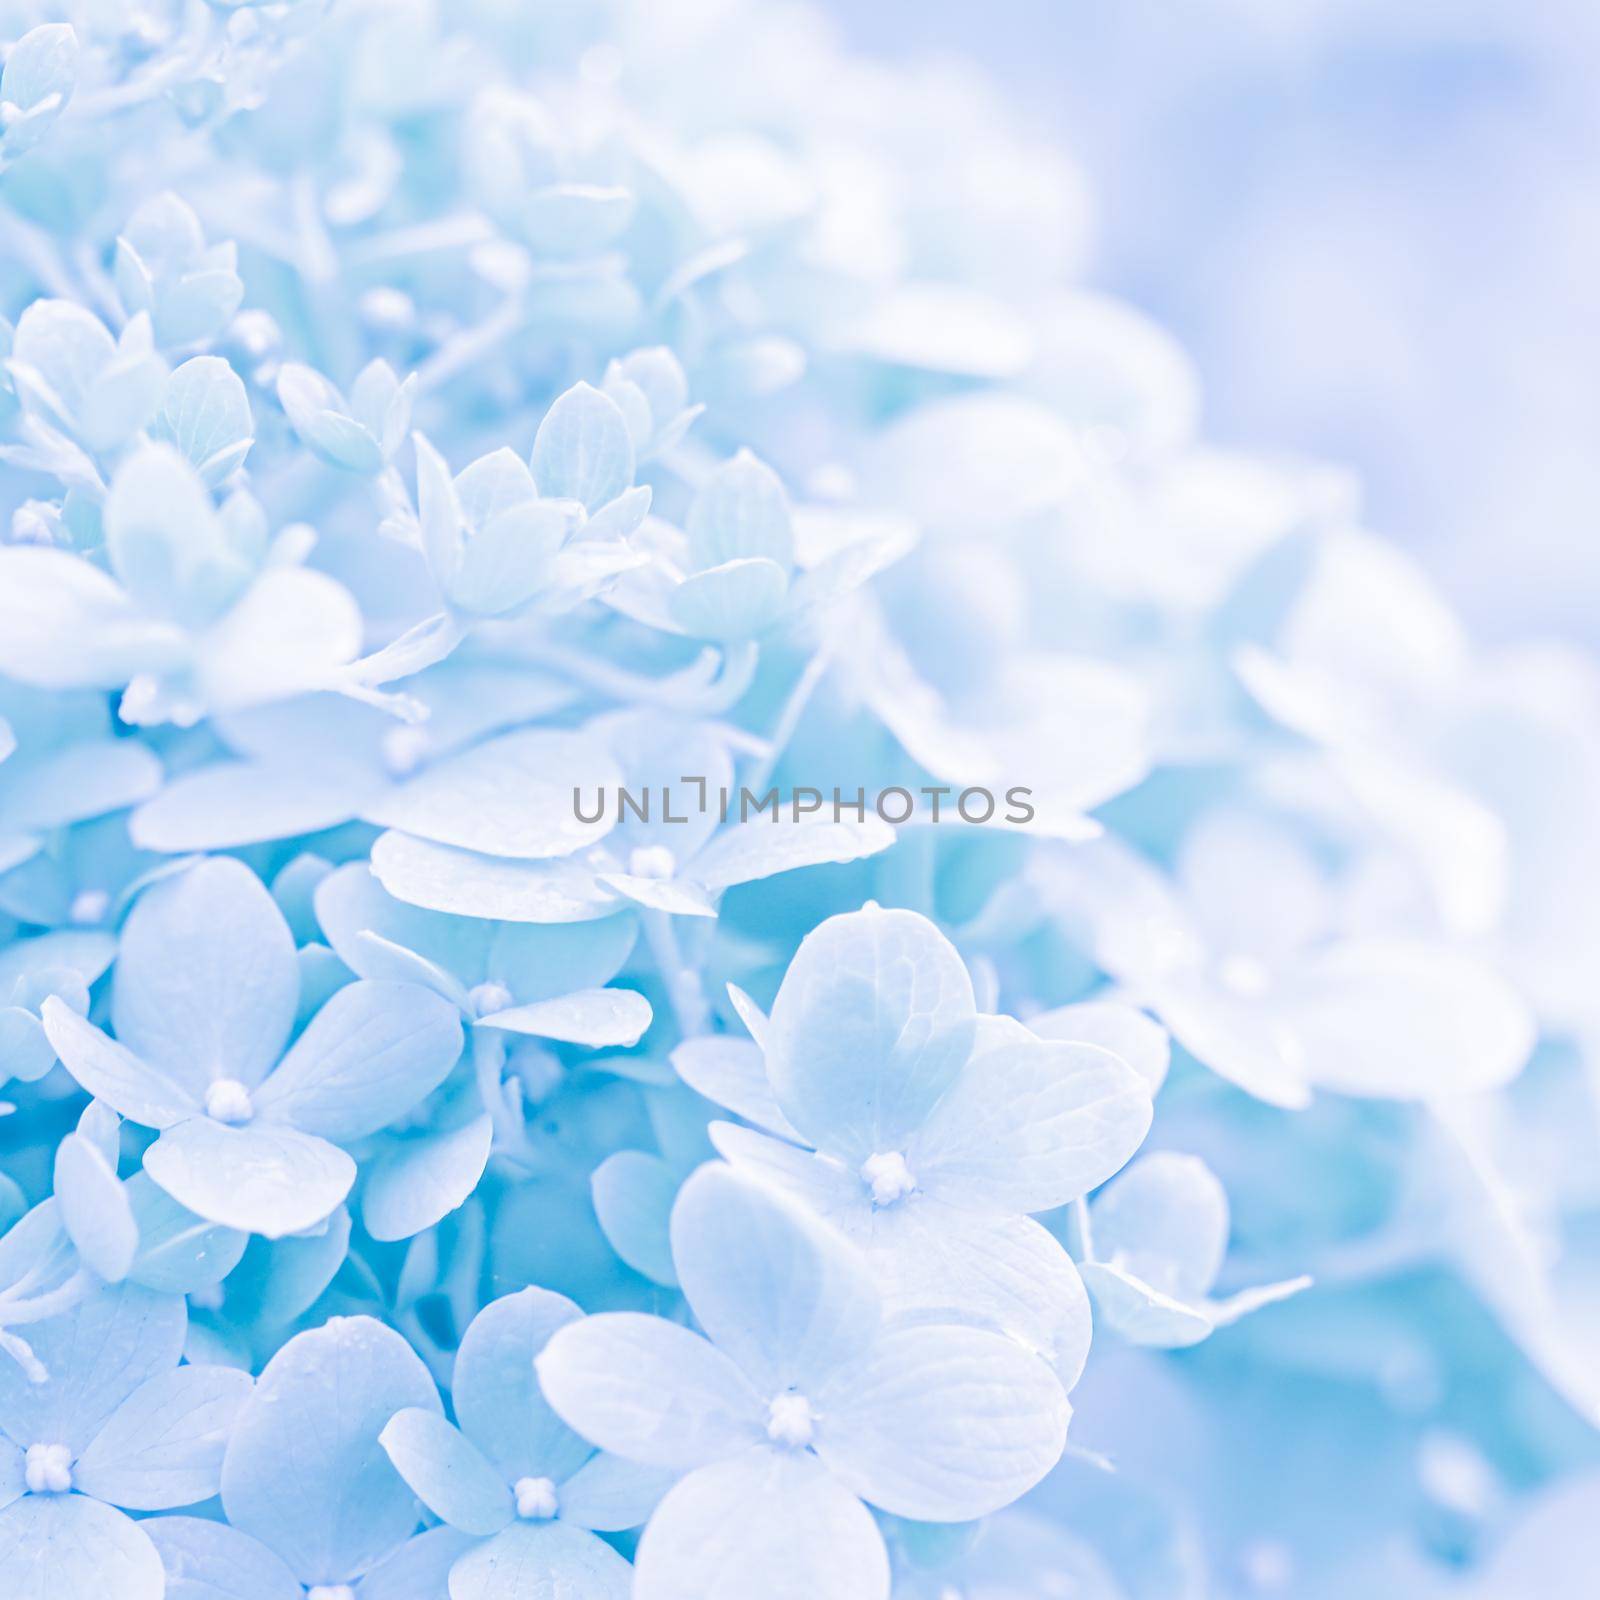 Background of white blue petals of Hydrangea or Hydrangea close-up. Soft focus